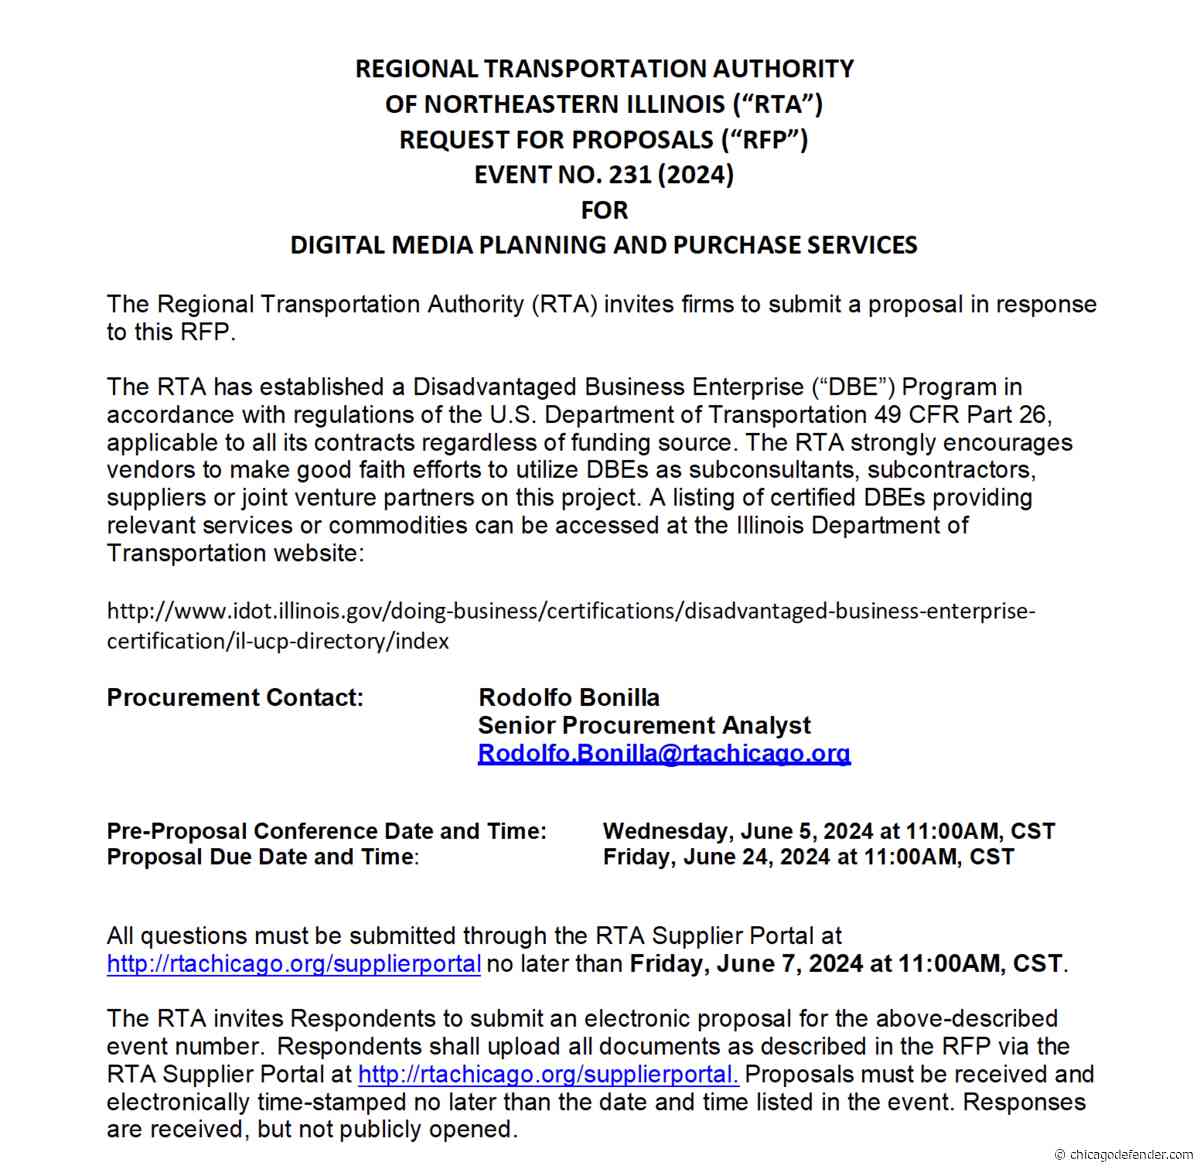 REGIONAL TRANSPORTATION AUTHORITY OF NORTHEASTERN ILLINOIS (“RTA”) REQUEST FOR PROPOSALS